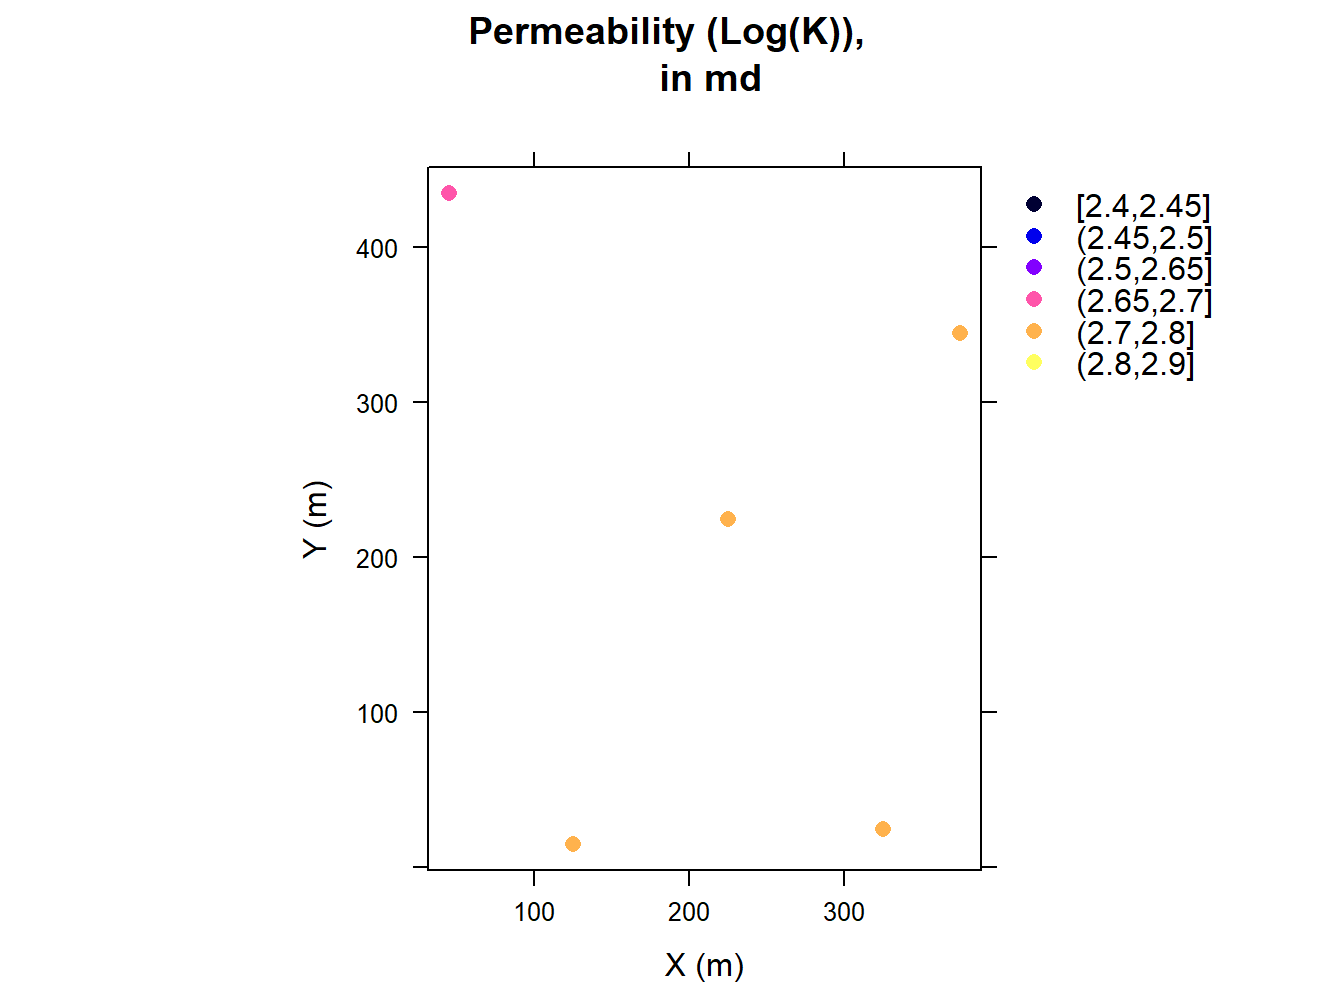 Graphical Representation of Five Permeability Points, Shown in the X, Y Coordinates